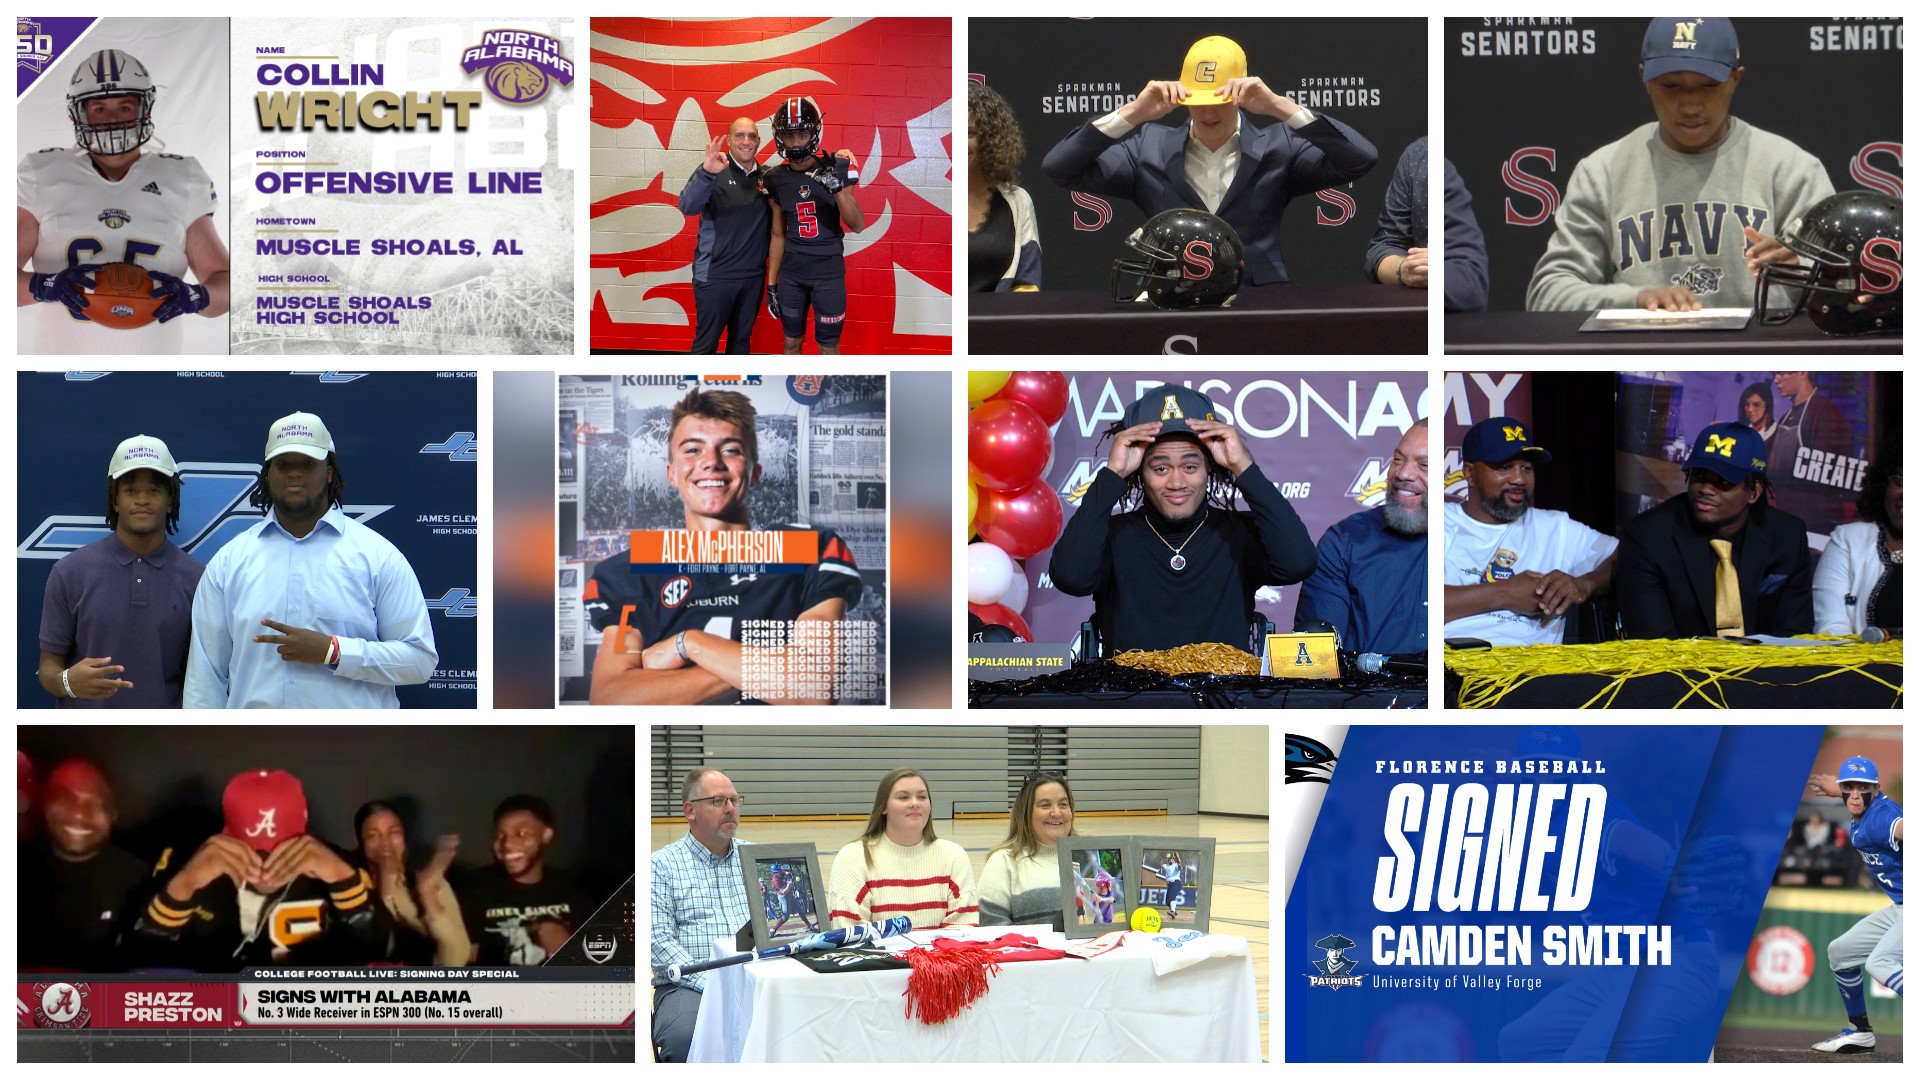 The Early Signing Period for college football season kicked off on Wednesday. Nearly a dozen local student-athletes signed National Letters of Intent.